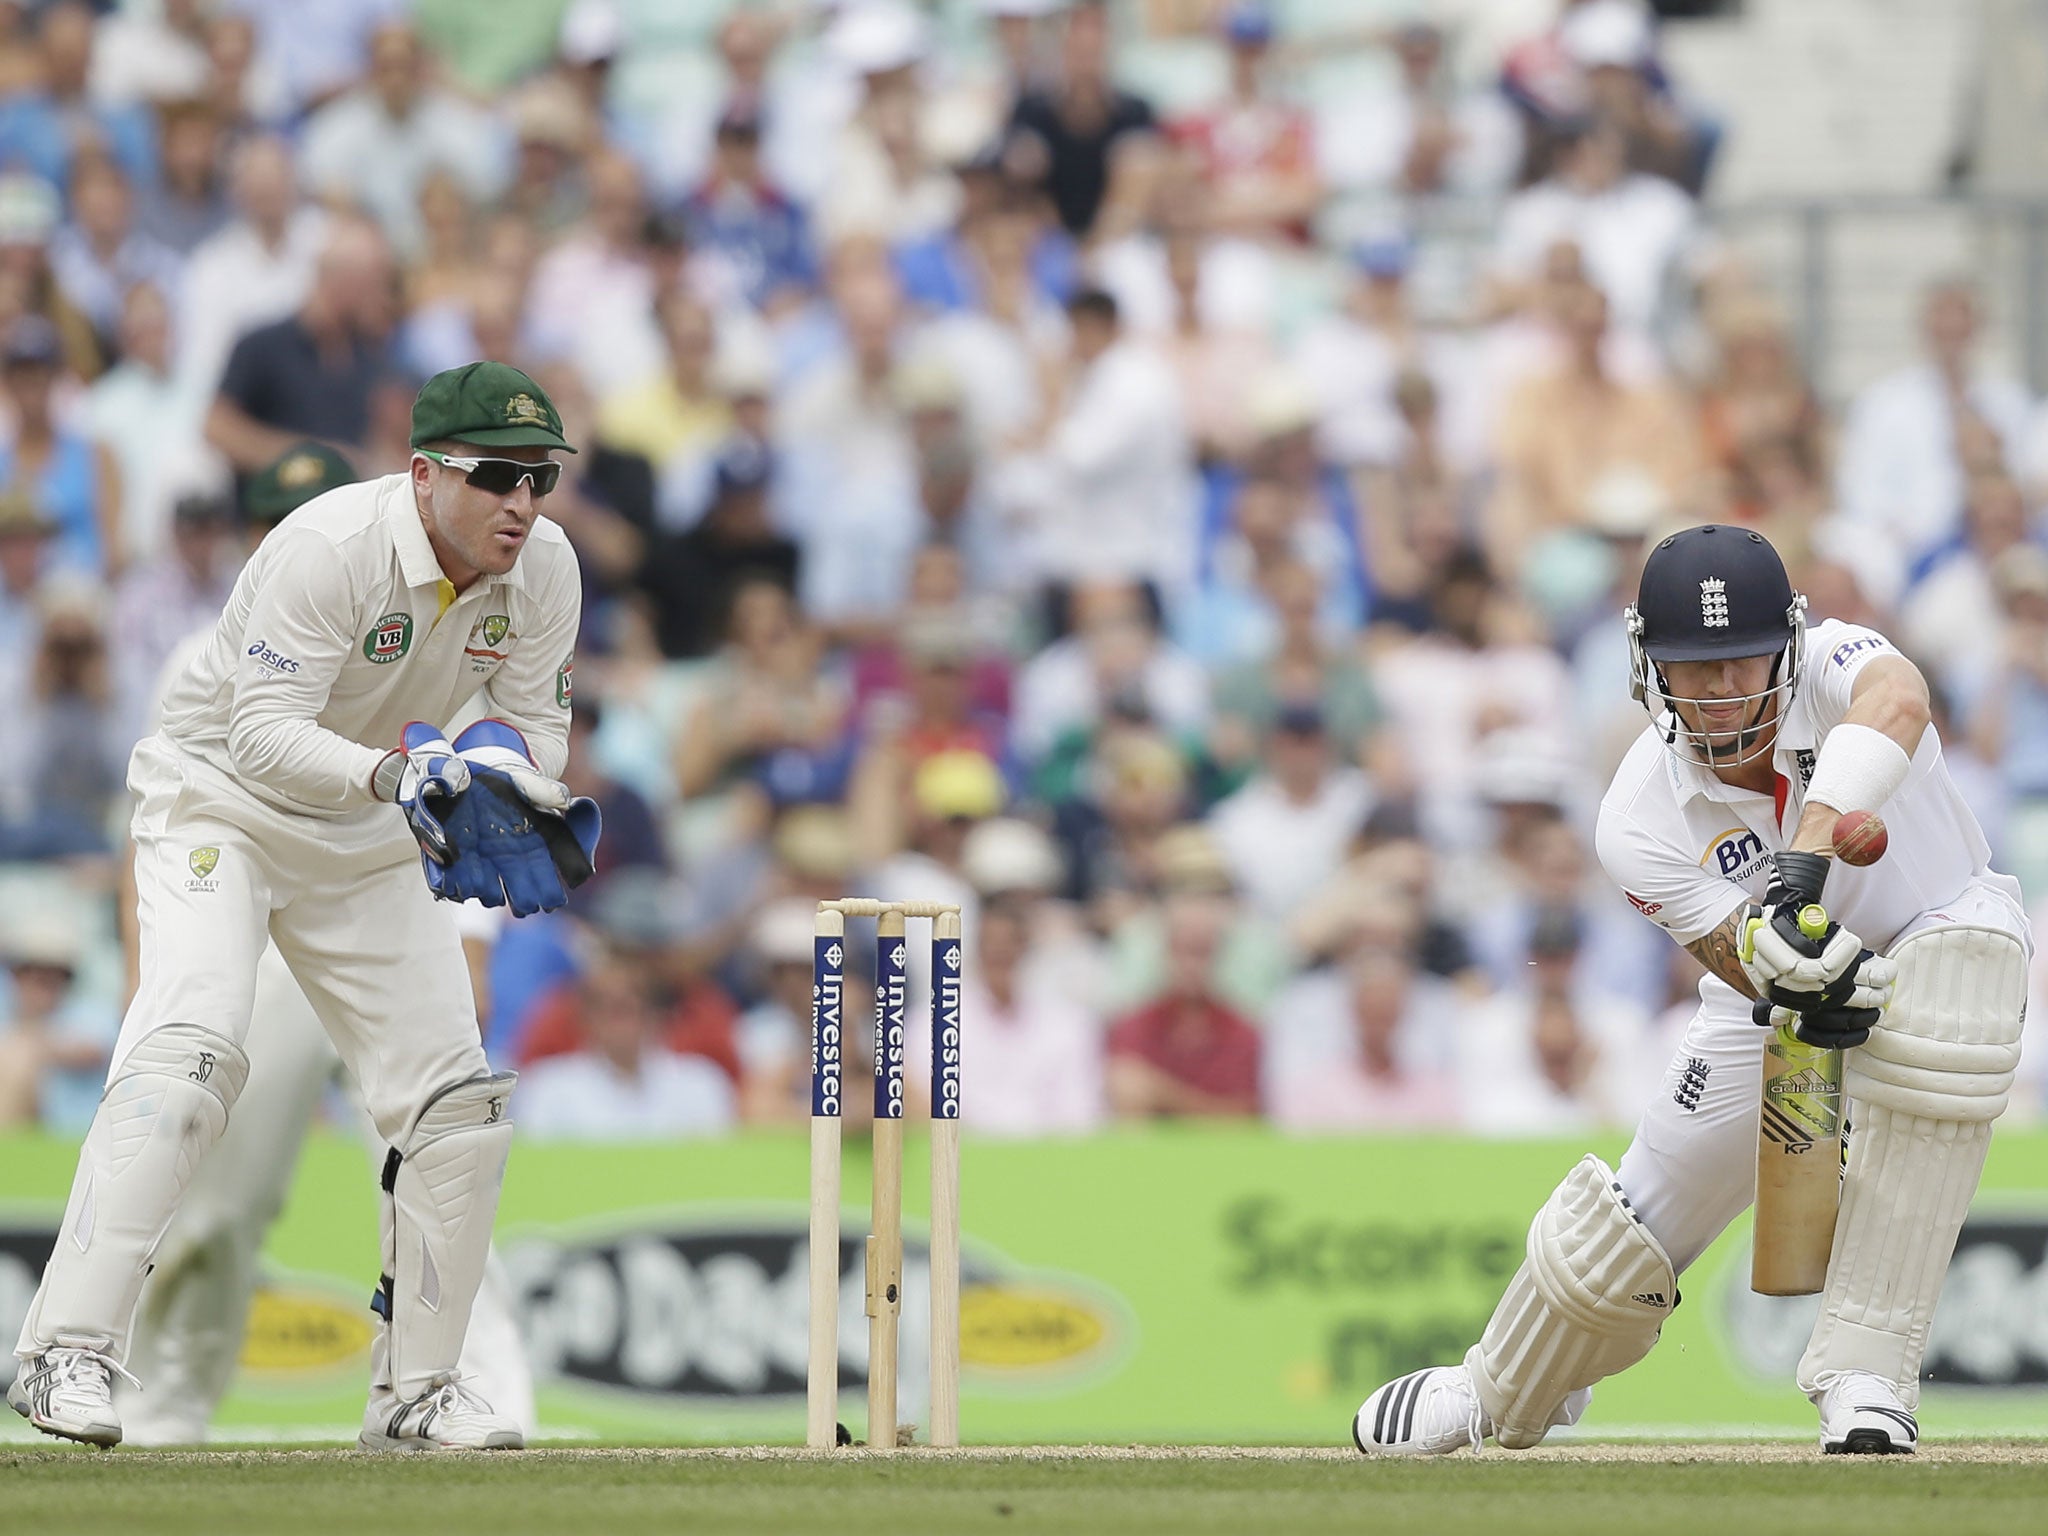 Straight bat: Even the flamboyant Kevin Pietersen went on the defensive in England’s first innings at The Kia Oval